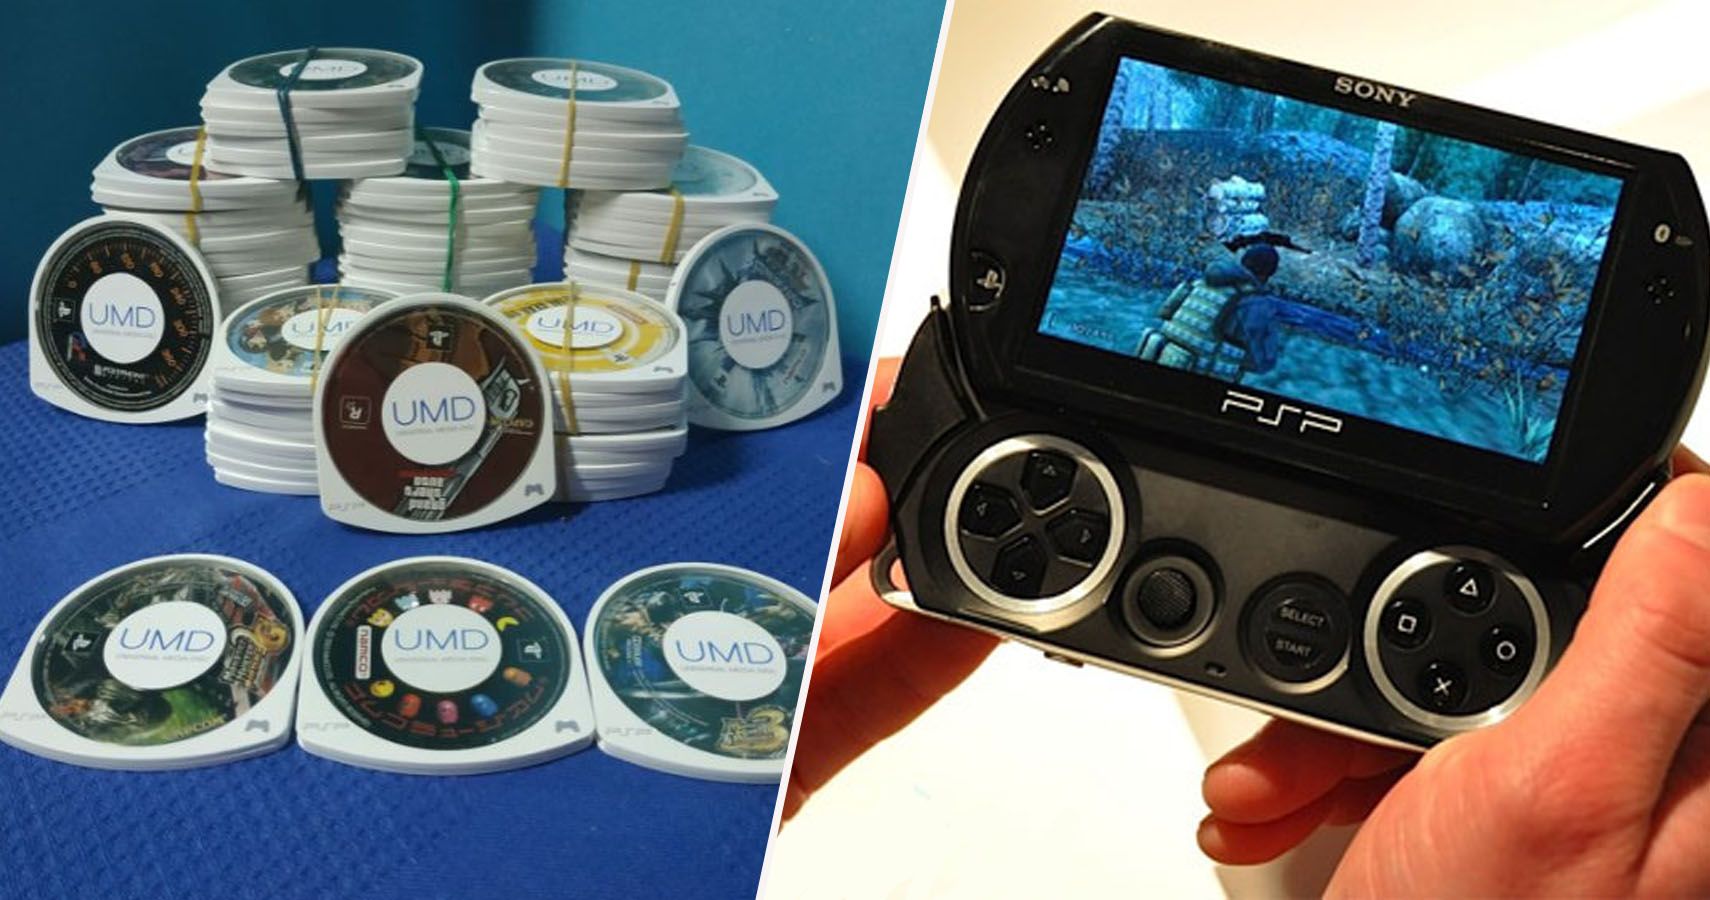 is there a new psp coming out